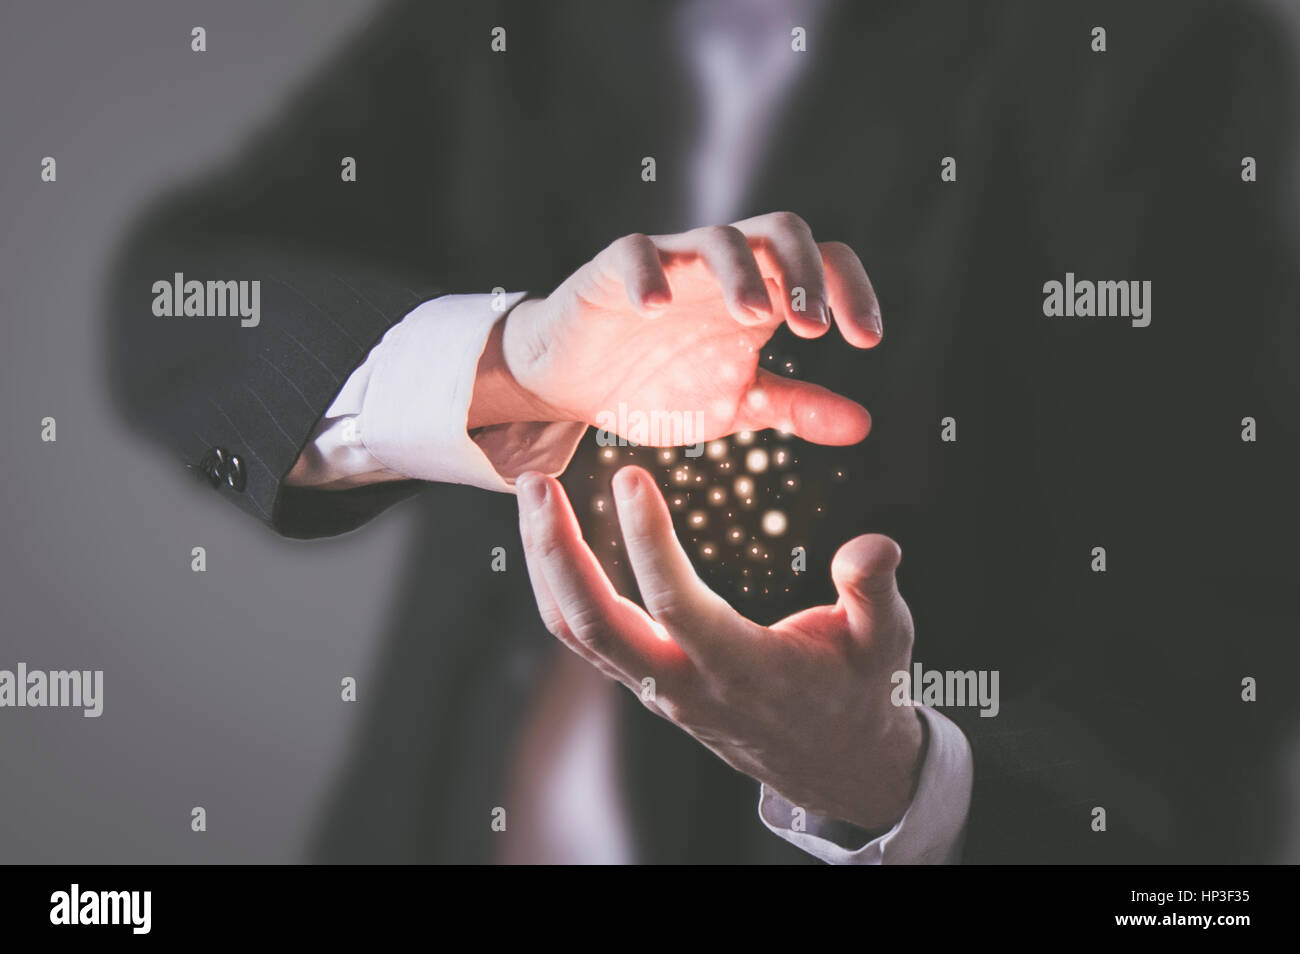 Magic Hand stock image. Image of optimism, fingers, particles - 15631893